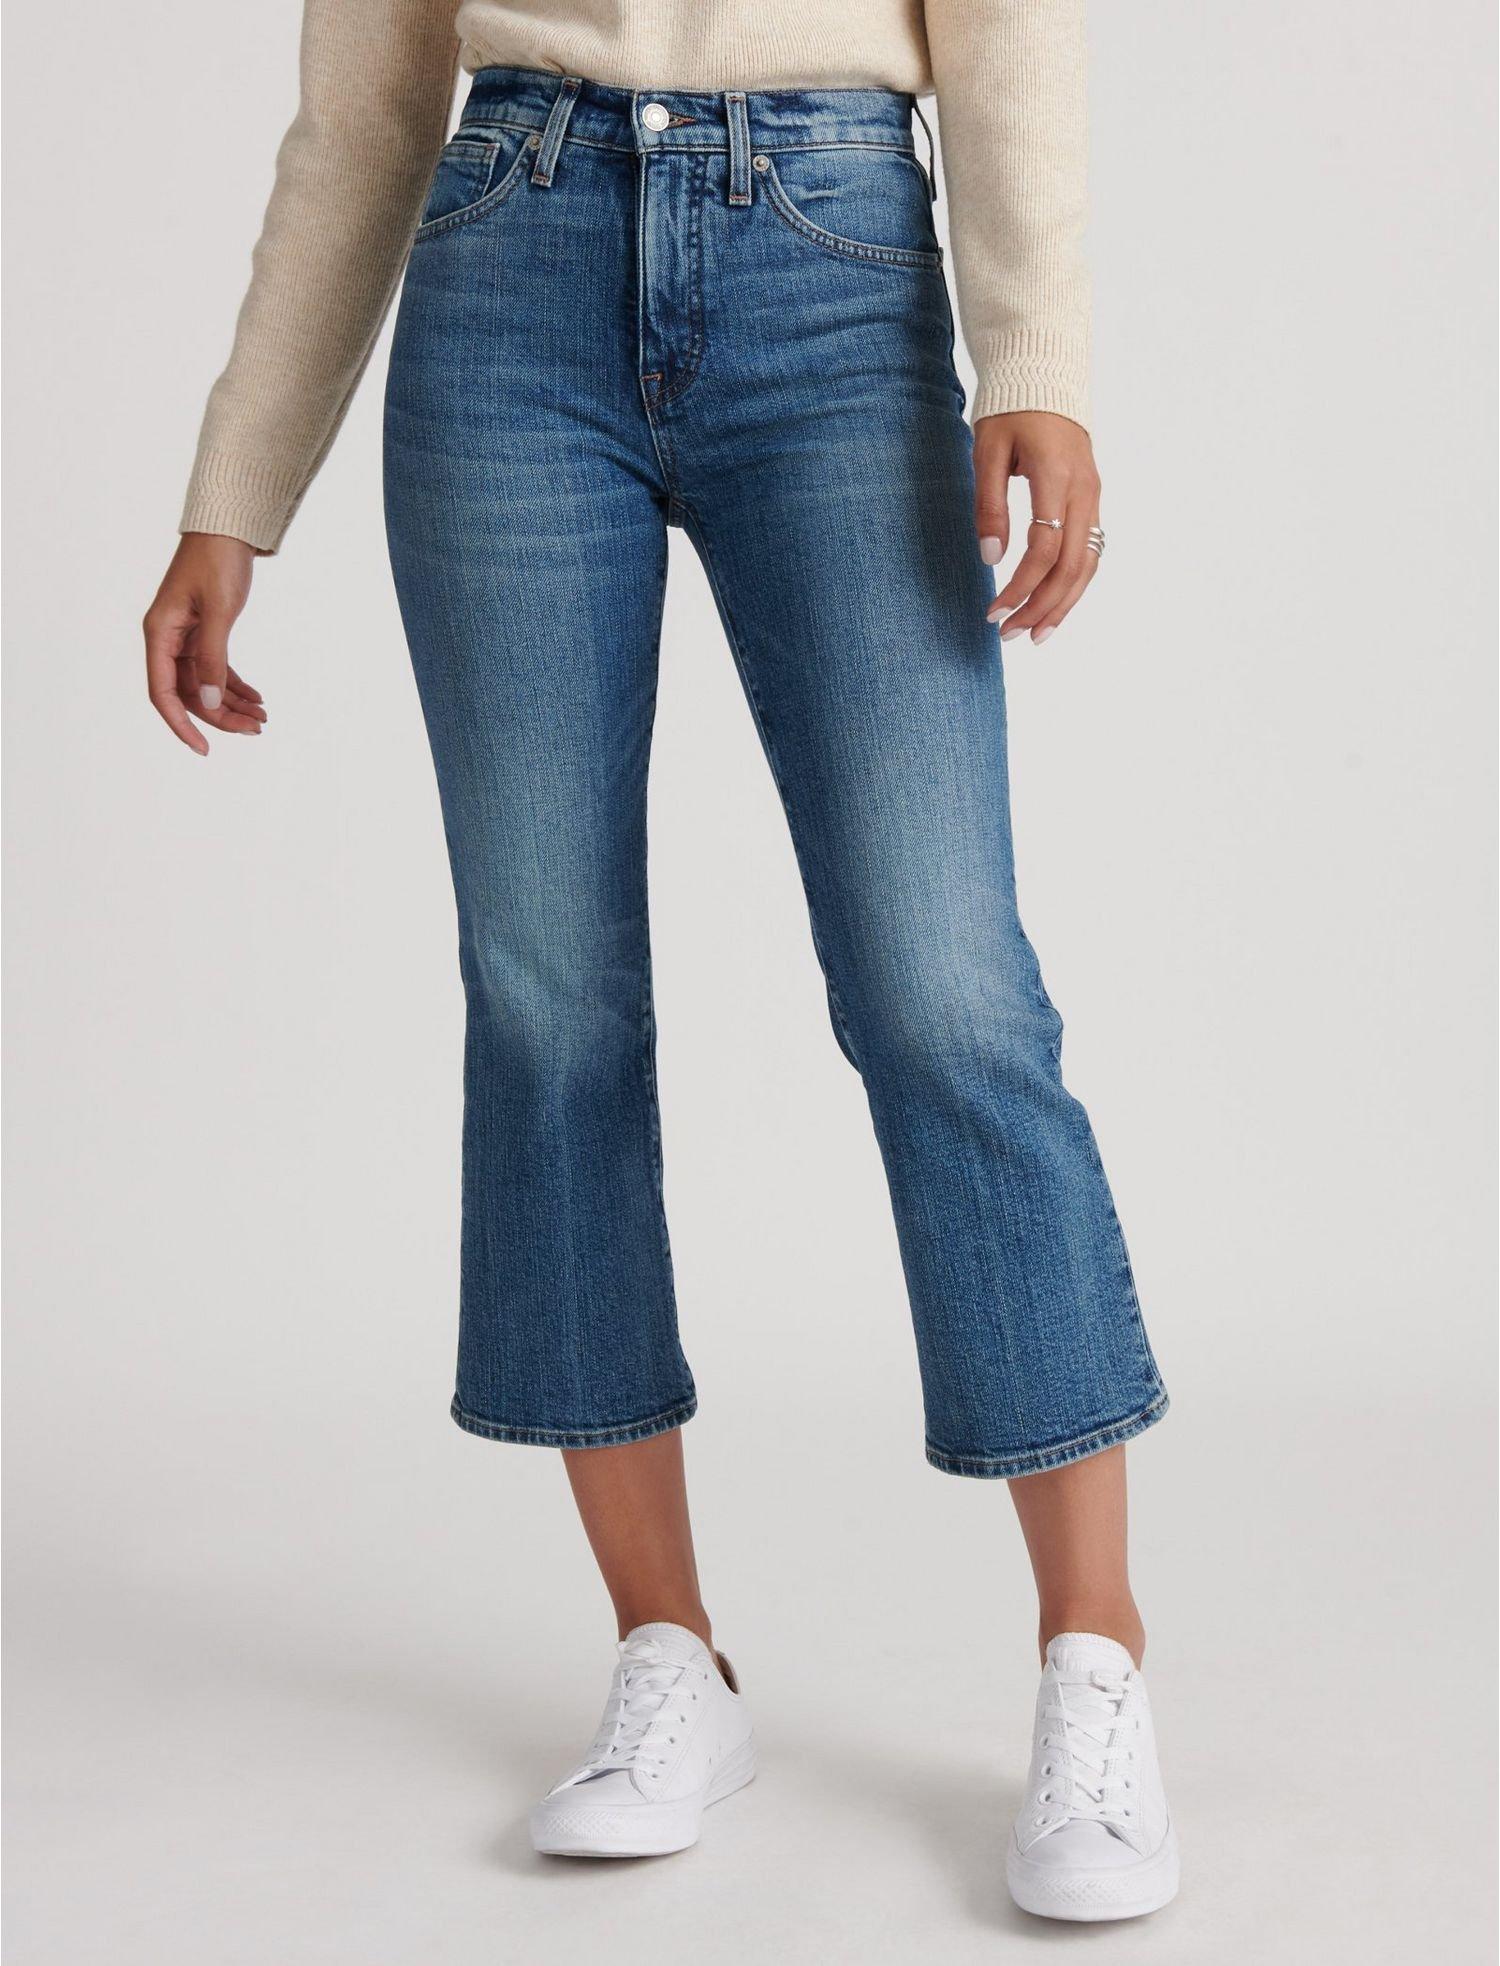 womens flare jeans canada